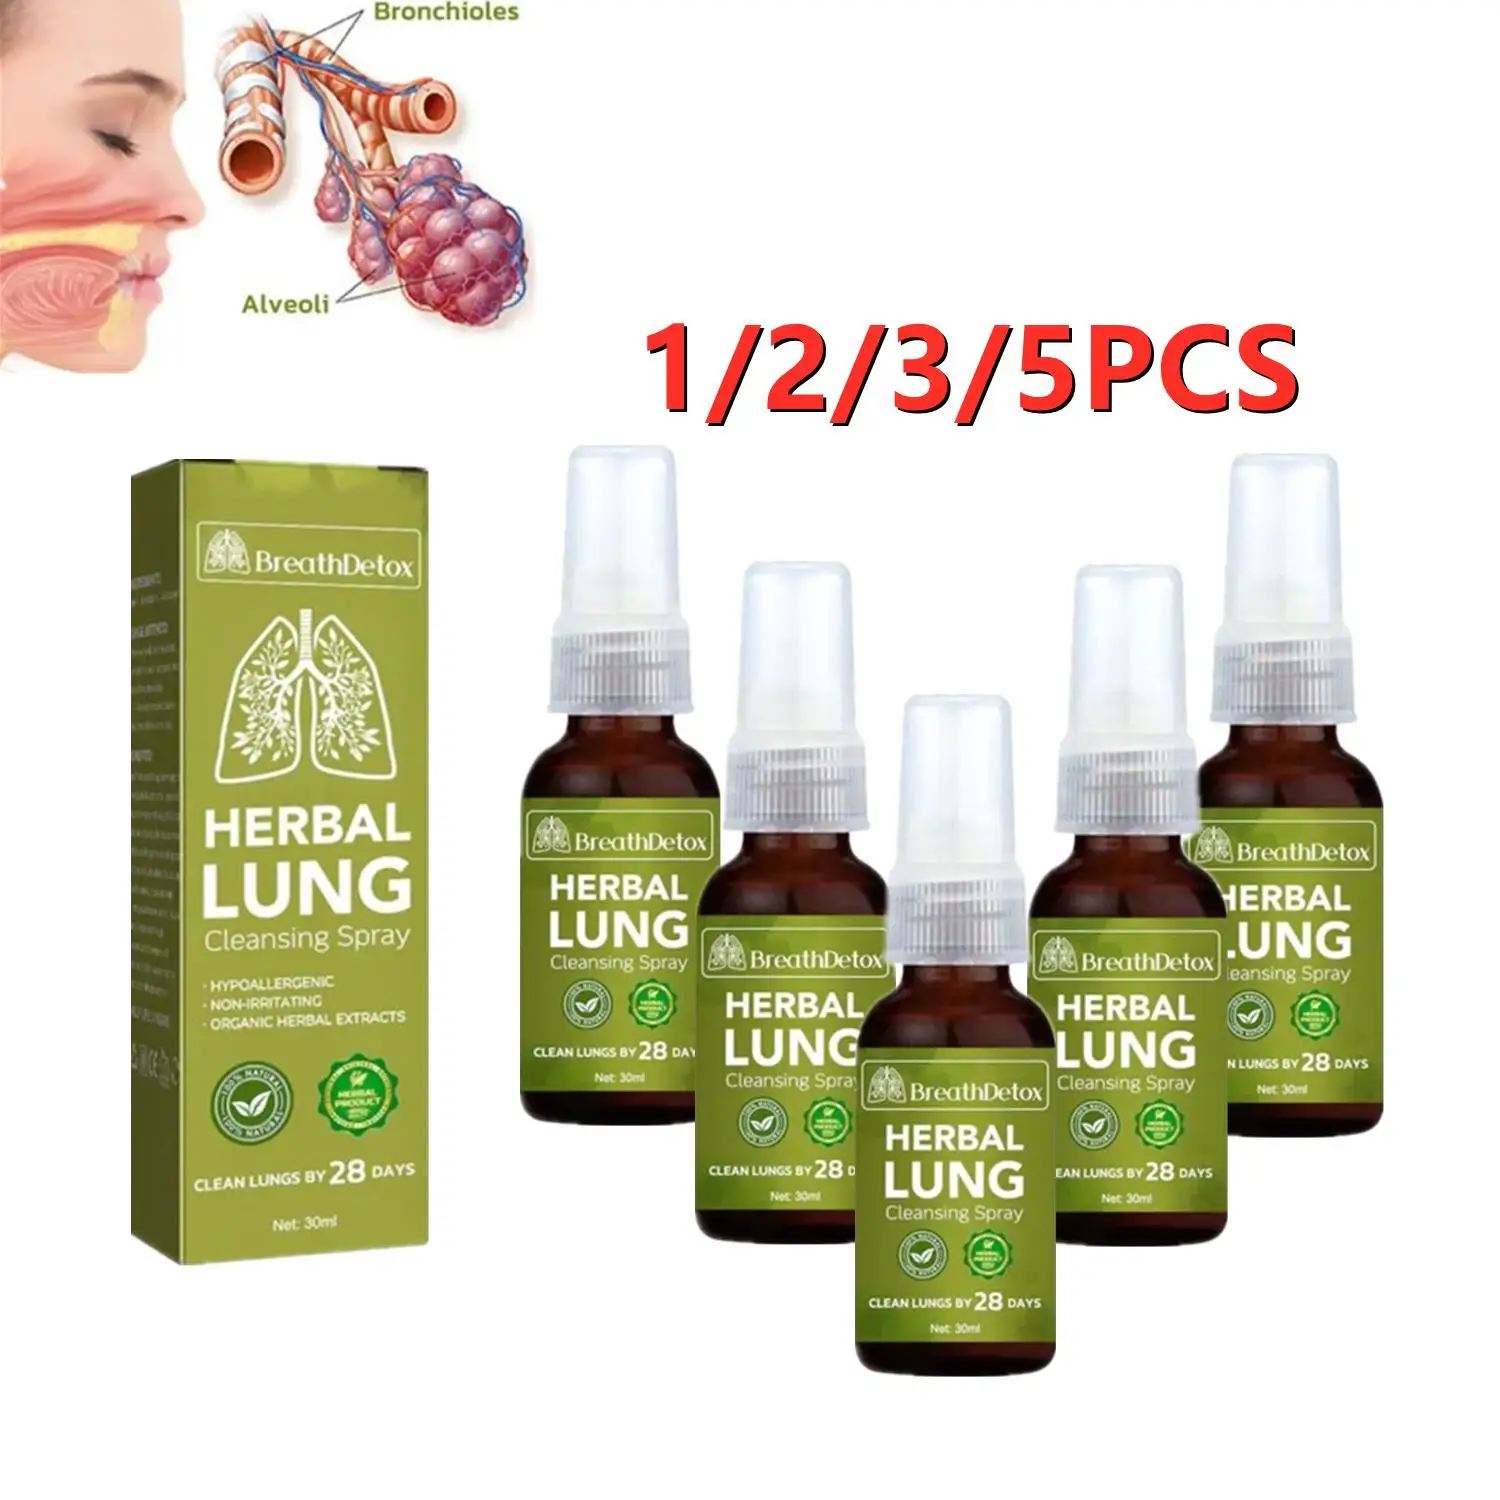 LOT Lung Herbal Cleanser Spray Smokers Clear Nasal Mist Anti Snoring Congestion Relieves Solution Clear Dry Throat Breath Spray 2pcs lung herbal cleanser spray smokers clear nasal mist anti snoring congestion relieves solution clear dry throat breath